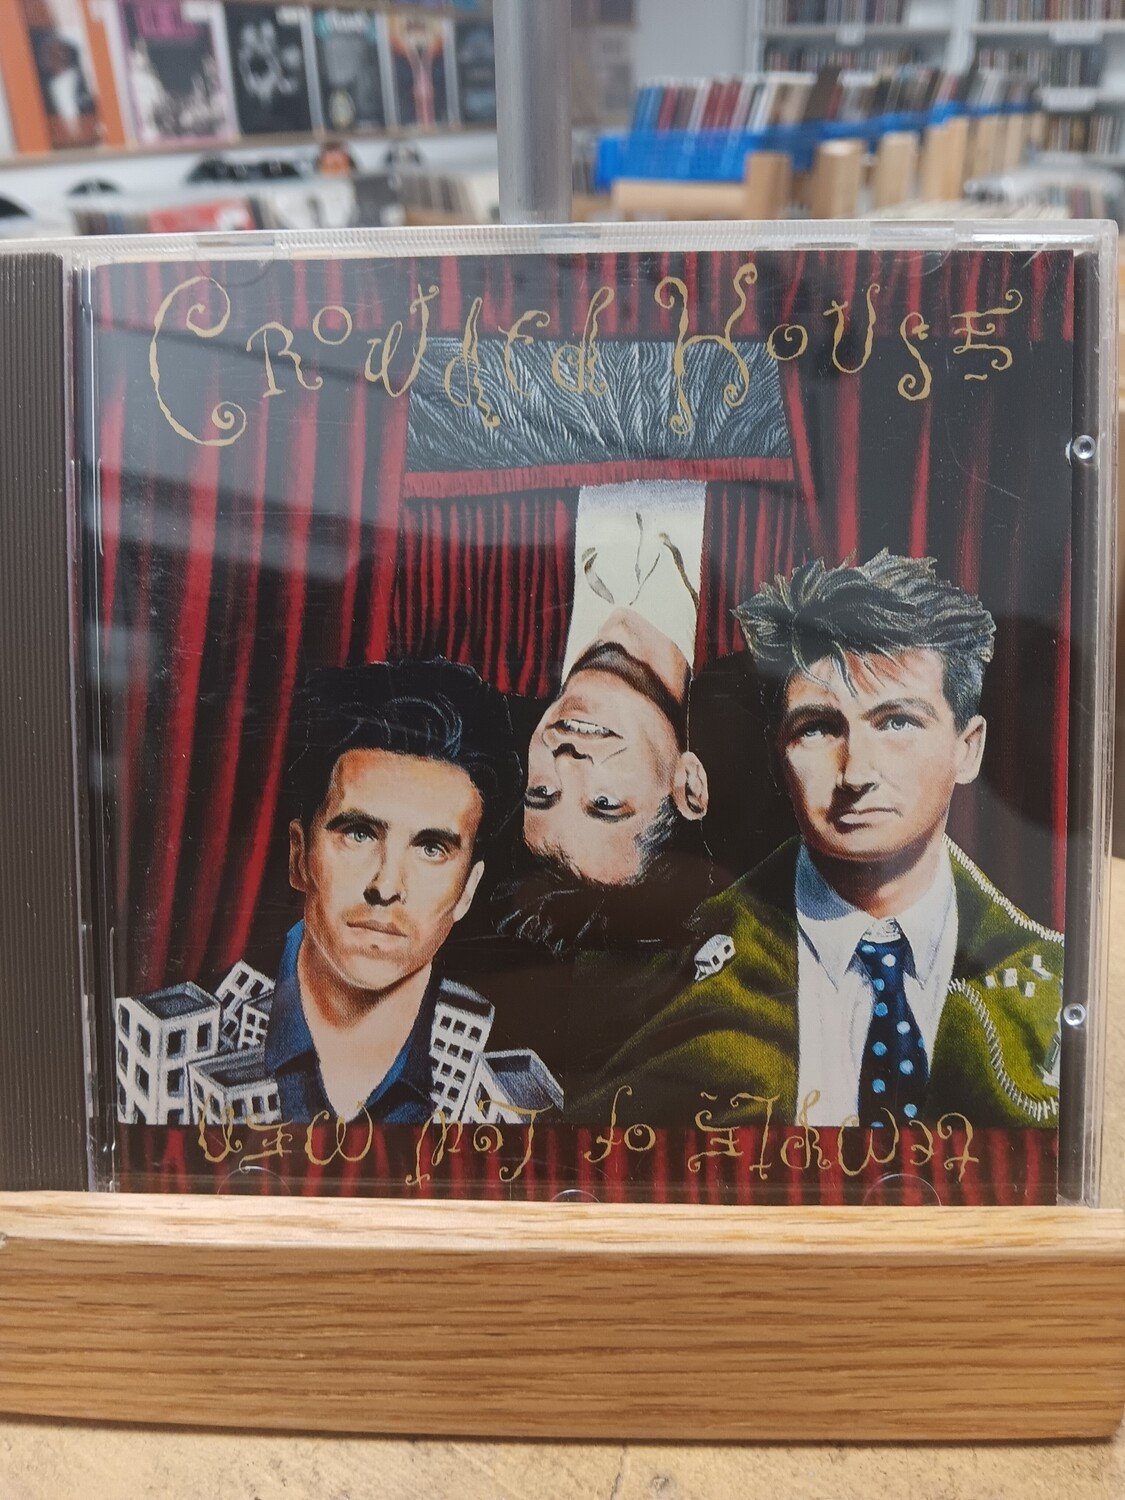 CROWDED HOUSE - Temple of love man (CD)